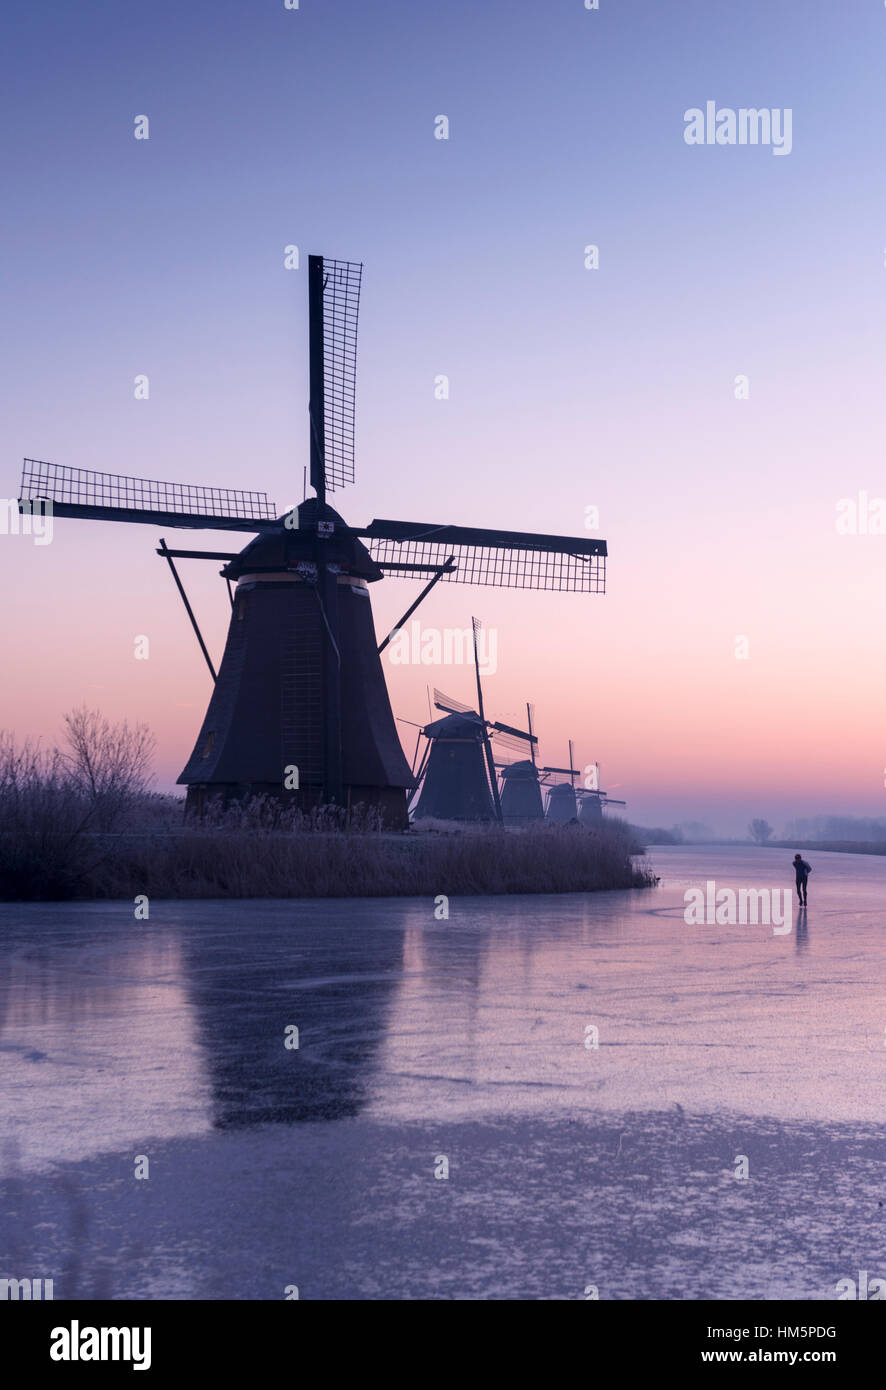 Winter sunrise over windmills at the Kinderdijk UNESCO World Heritage Site in the Netherlands, with someone skating on the ice Stock Photo